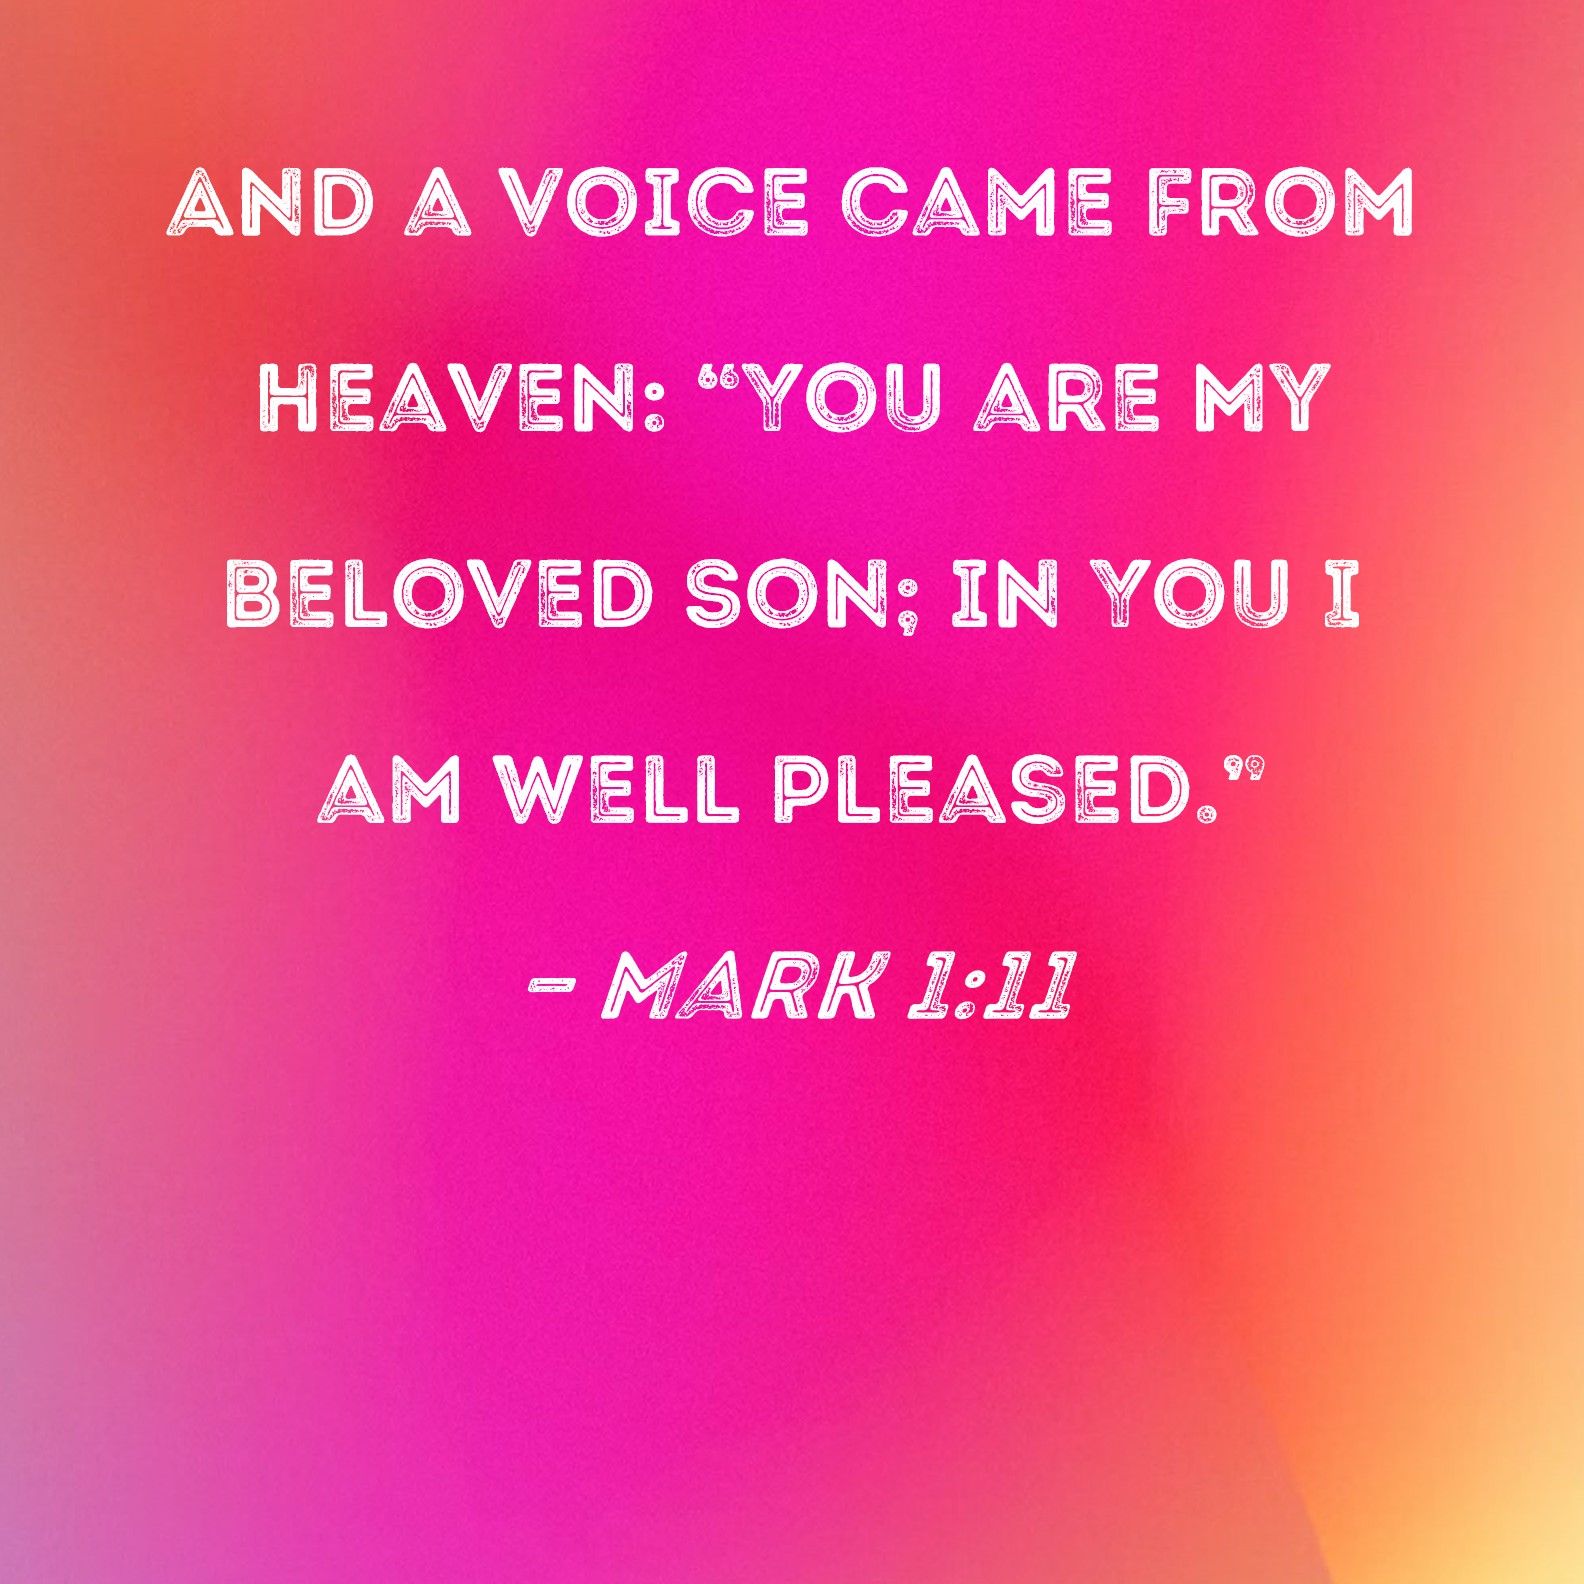 mark-1-11-and-a-voice-came-from-heaven-you-are-my-beloved-son-in-you